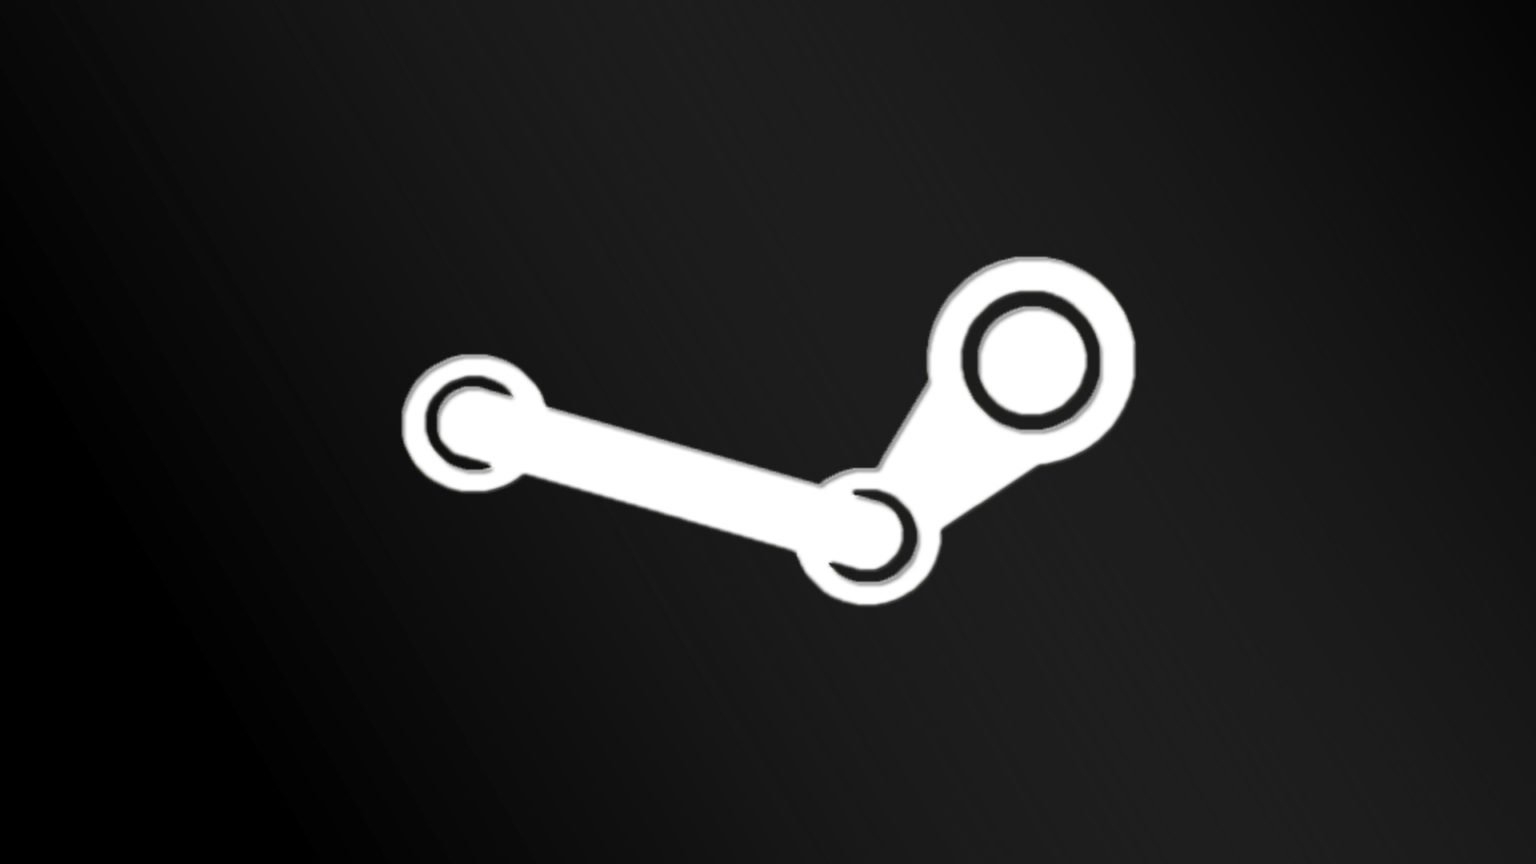 All steam icons gone фото 70